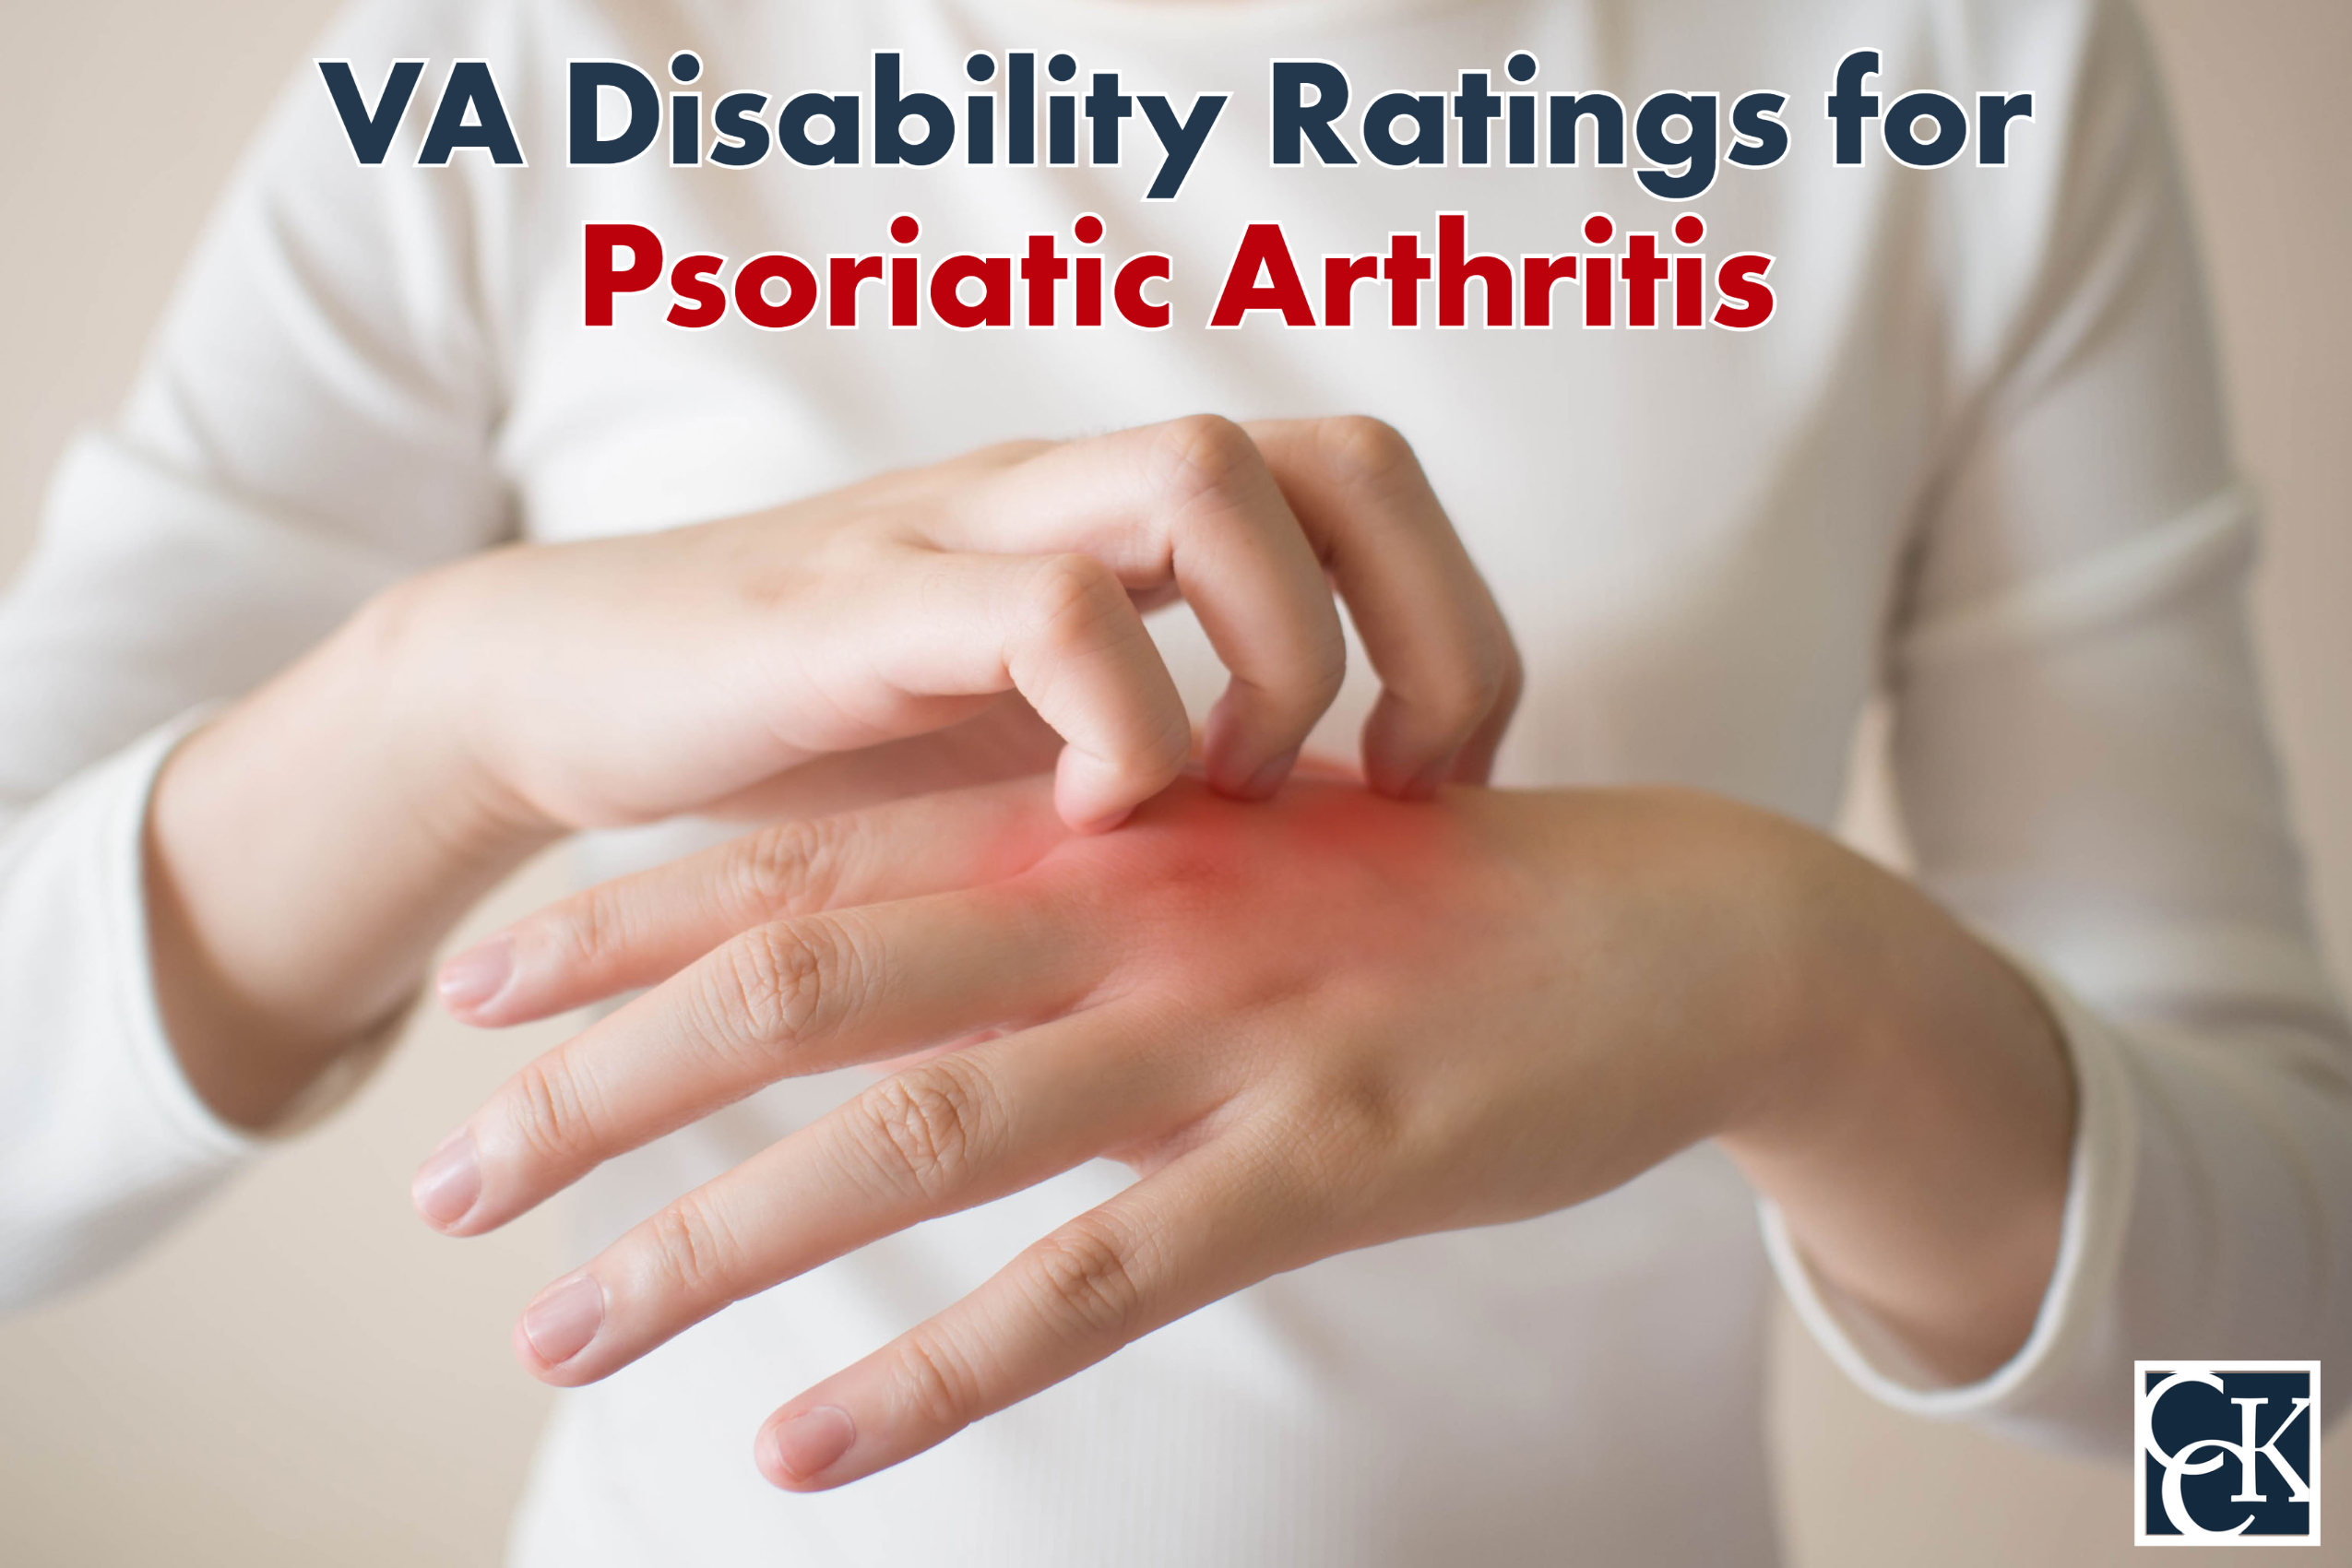 VA Disability Ratings and Benefits for Psoriatic Arthritis ...